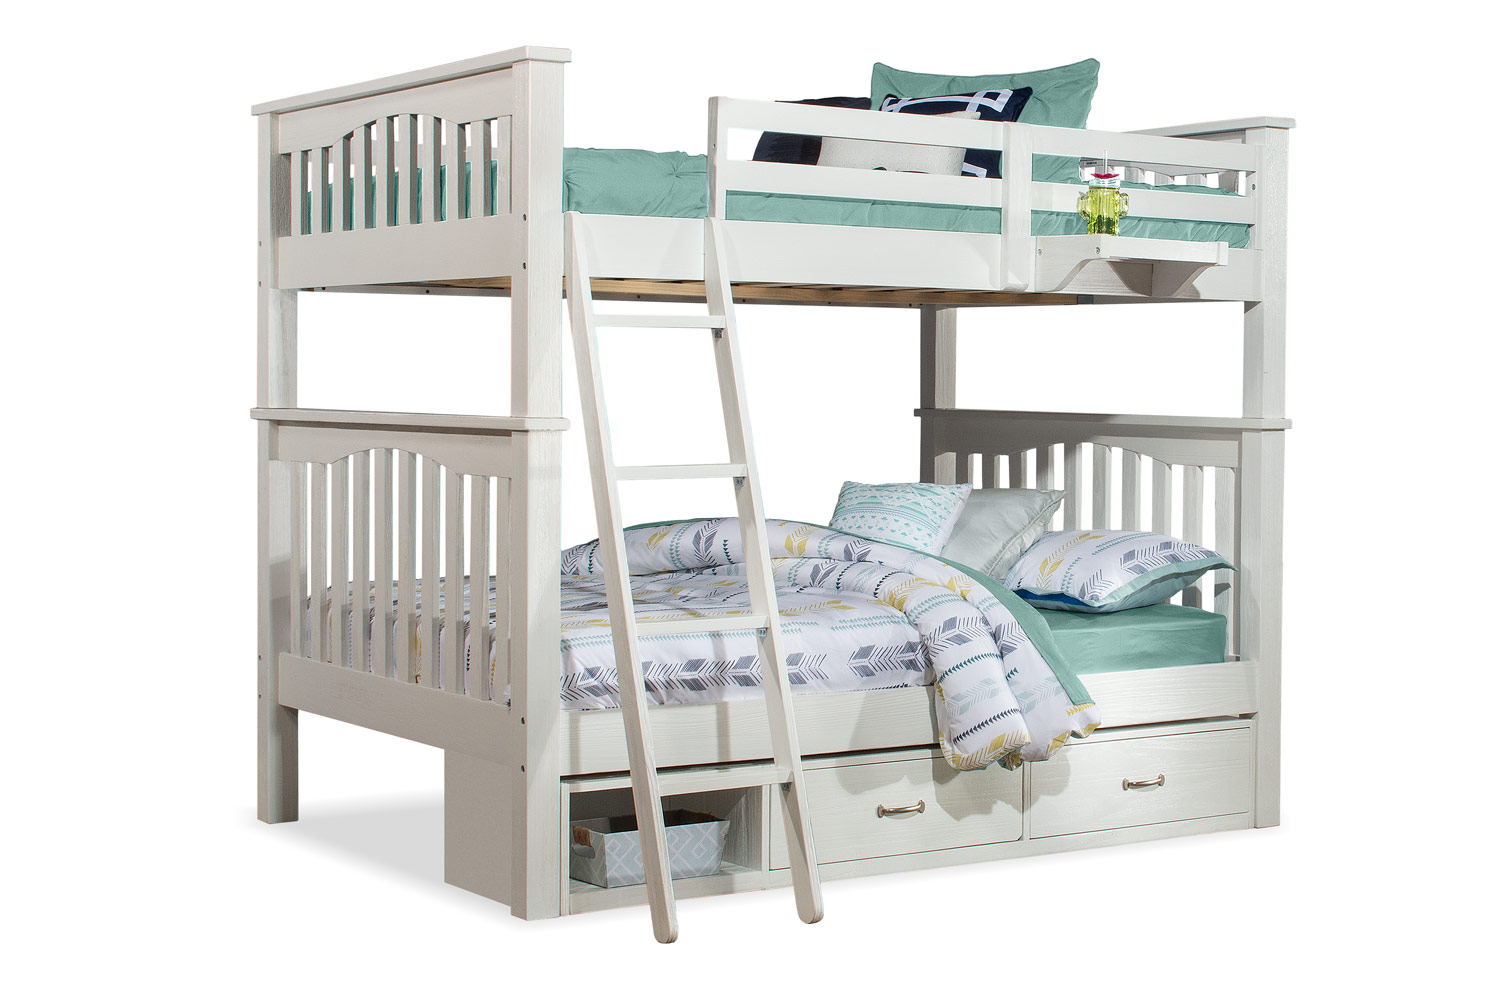 NE Kids Highlands Harper Full/Full Bunk Bed with Storage Unit and Hanging Nightstand - White Finish